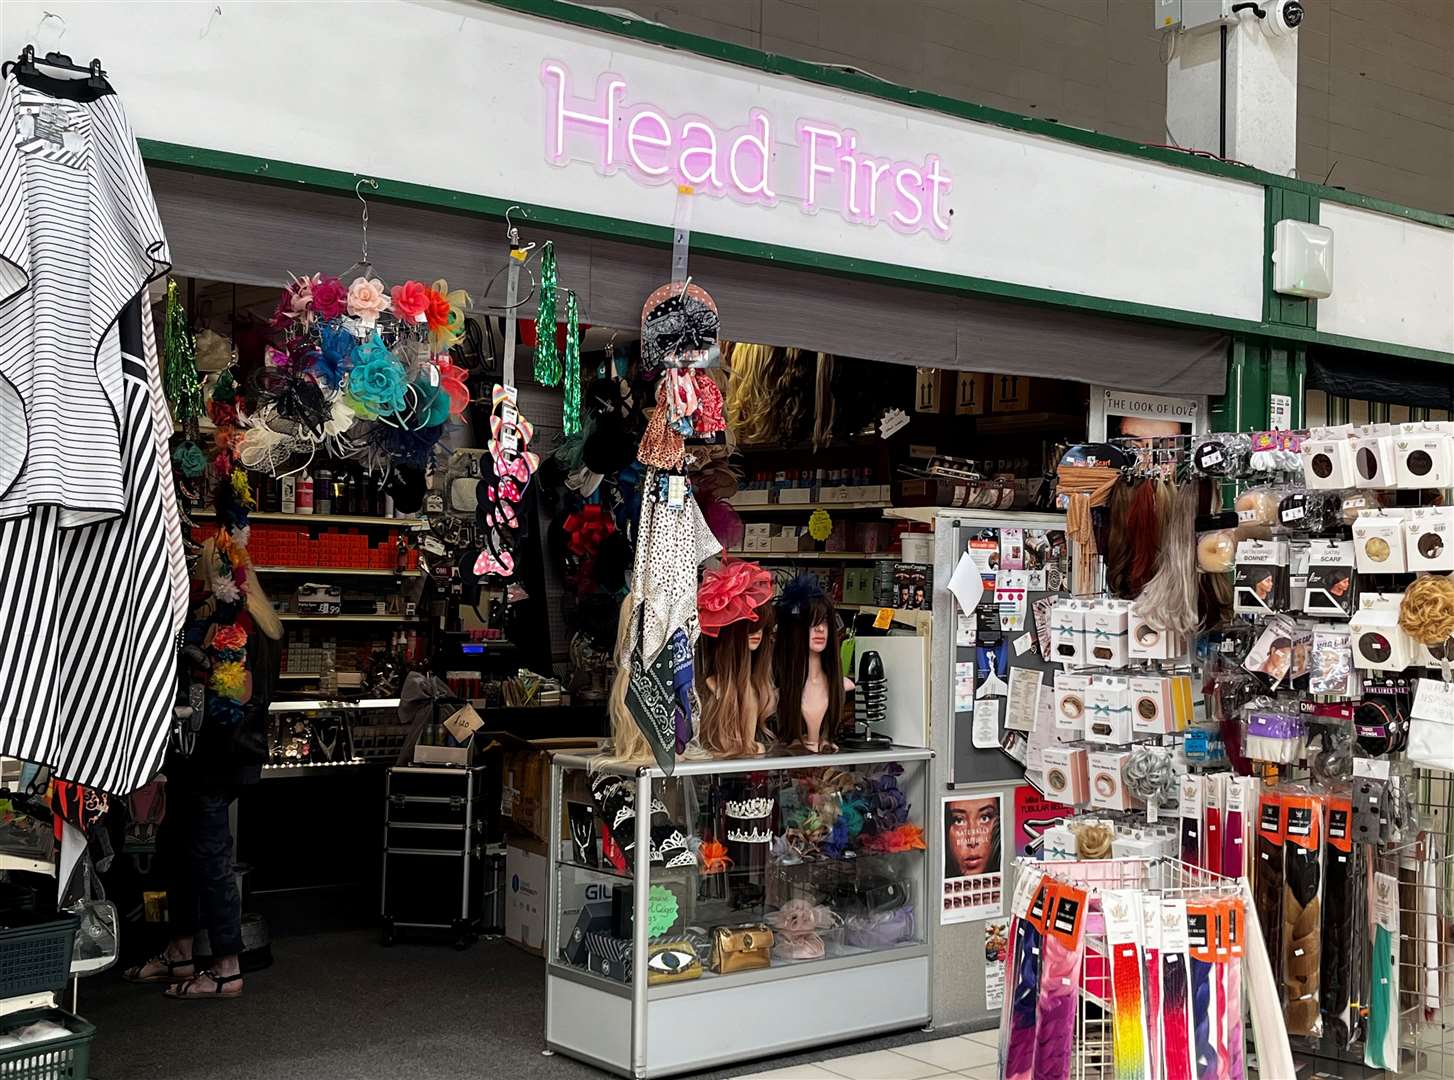 Head First Hair and Beauty Products in Dartford